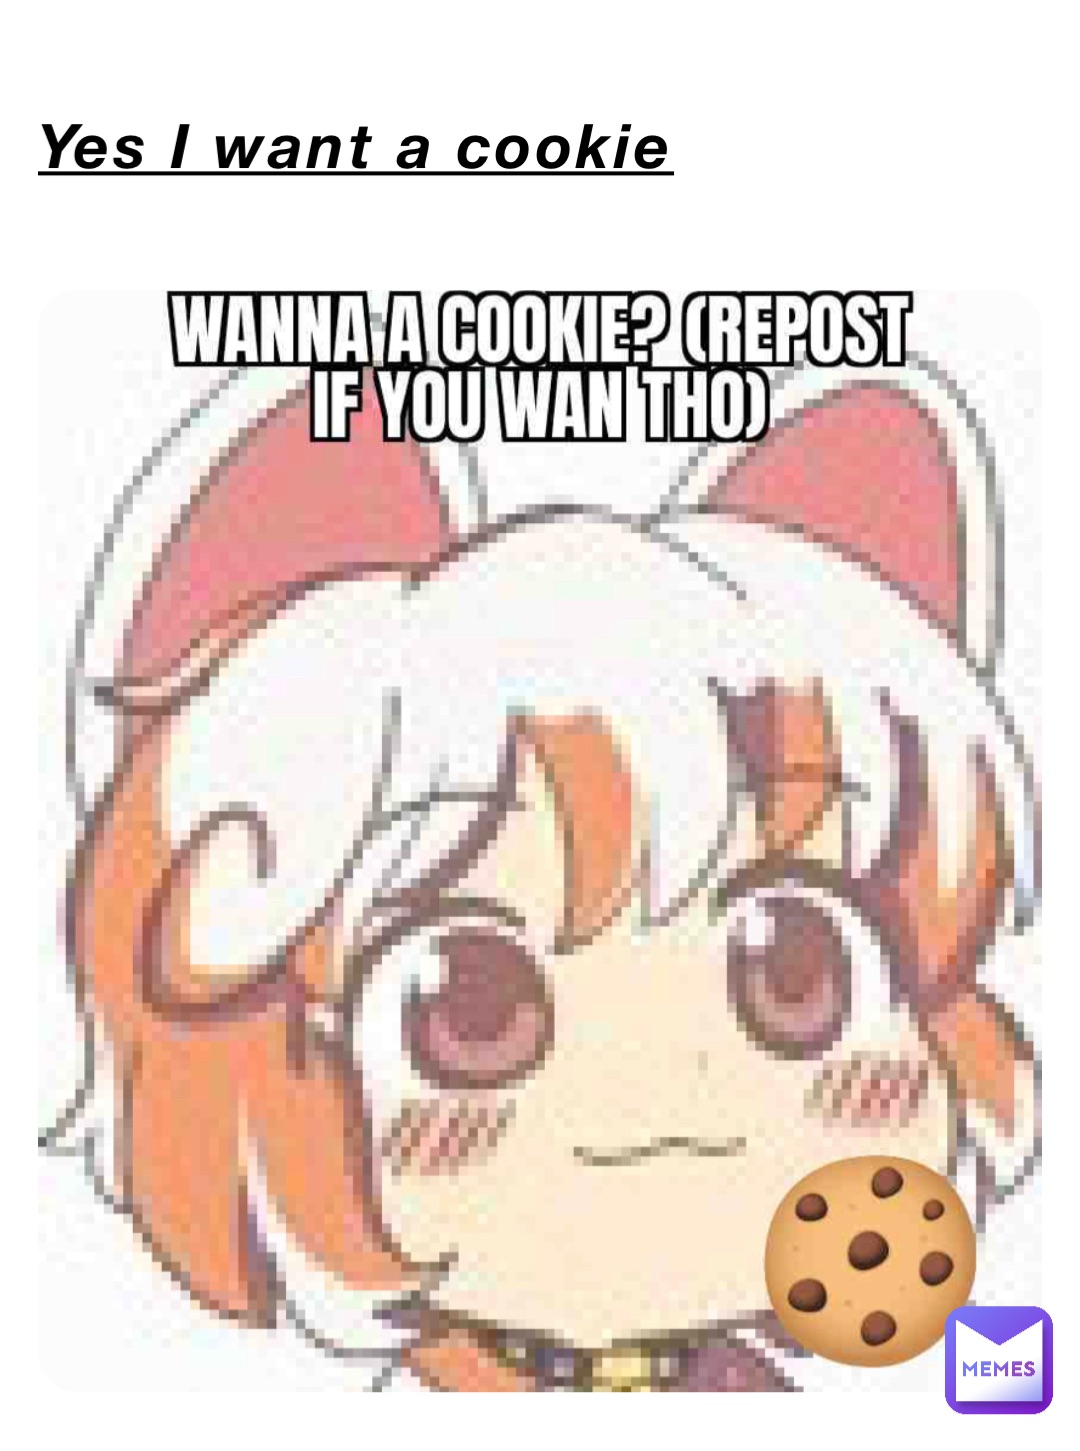 Yes I want a cookie